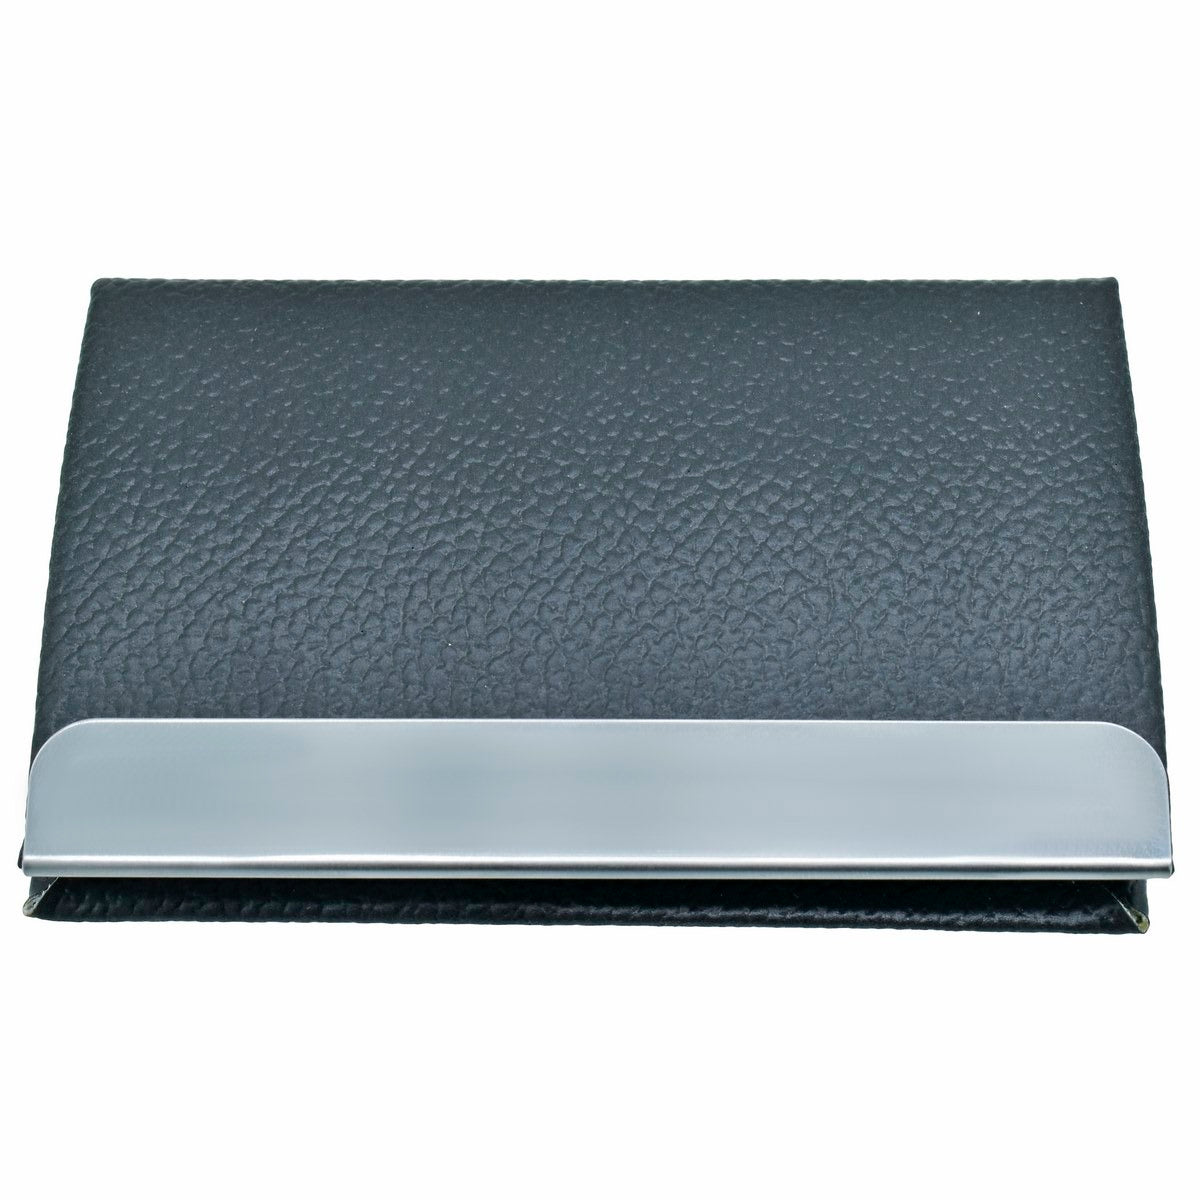 Black Magnetic Business Visiting Card Holder - For Corporate Gifting, Event Gifting, Freebies, Promotions JA (114) 21